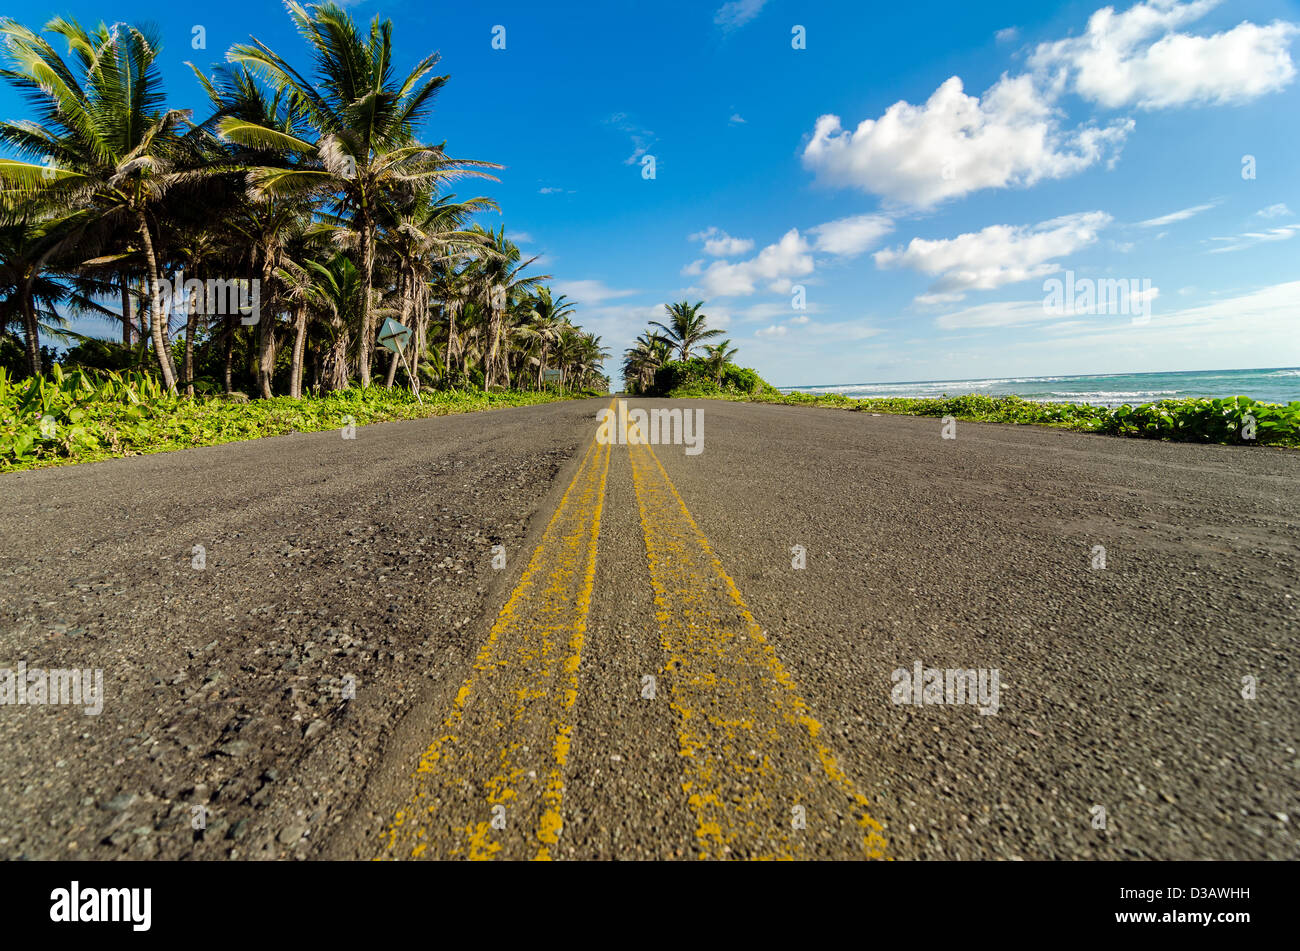 View of Caribbean coastal road in San Andres, Colombia at a low angle Stock Photo